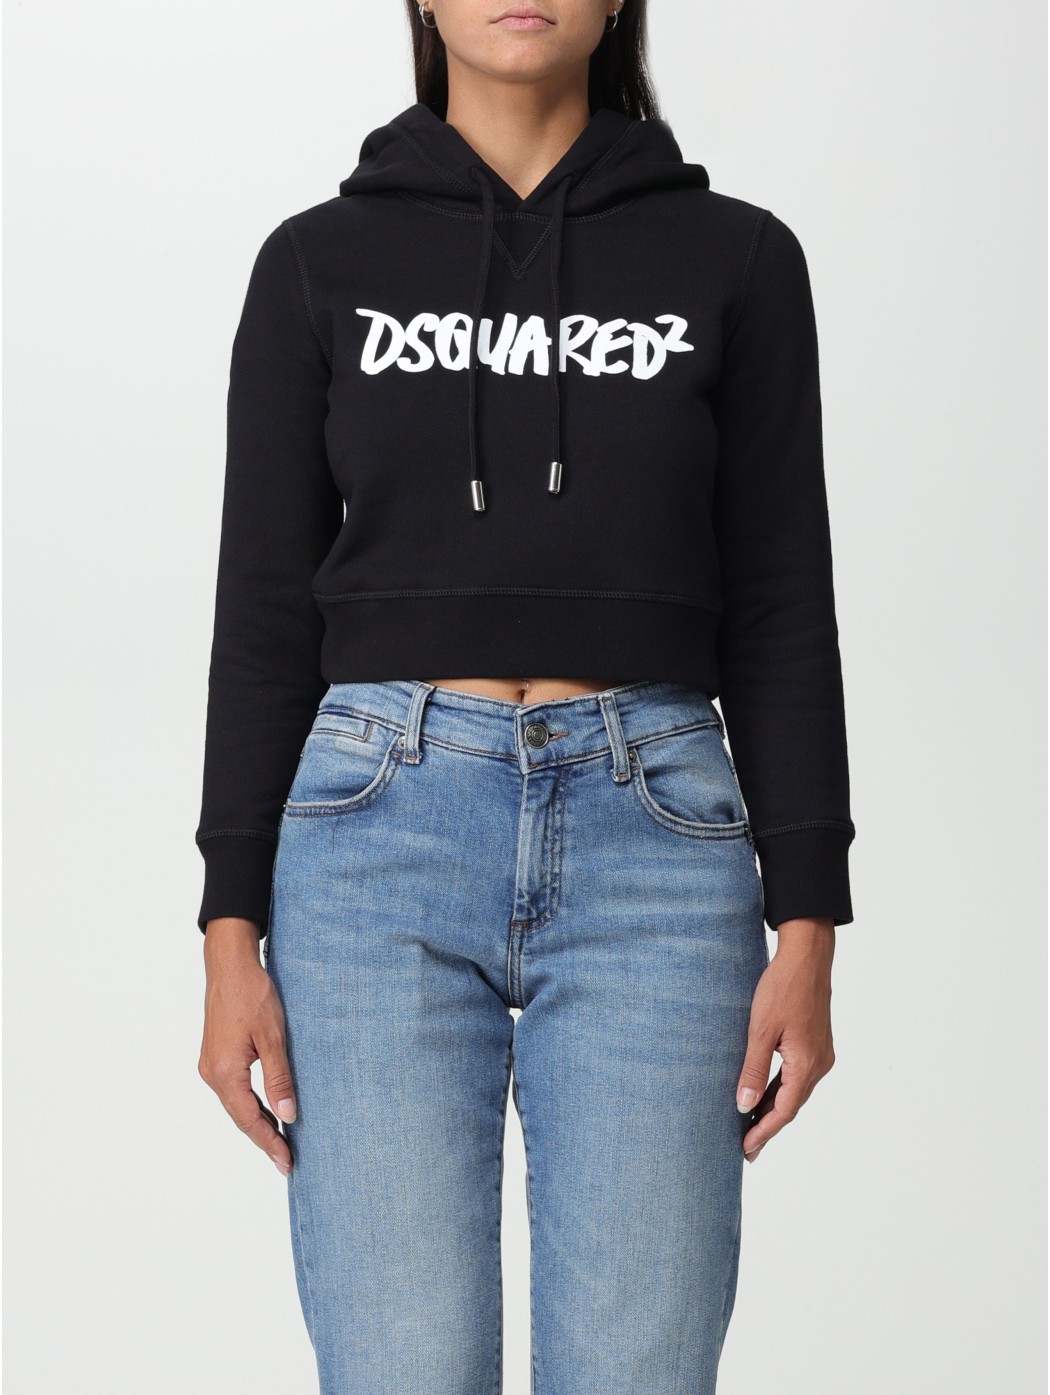 HOODIE DSQUARED2 WOMAN